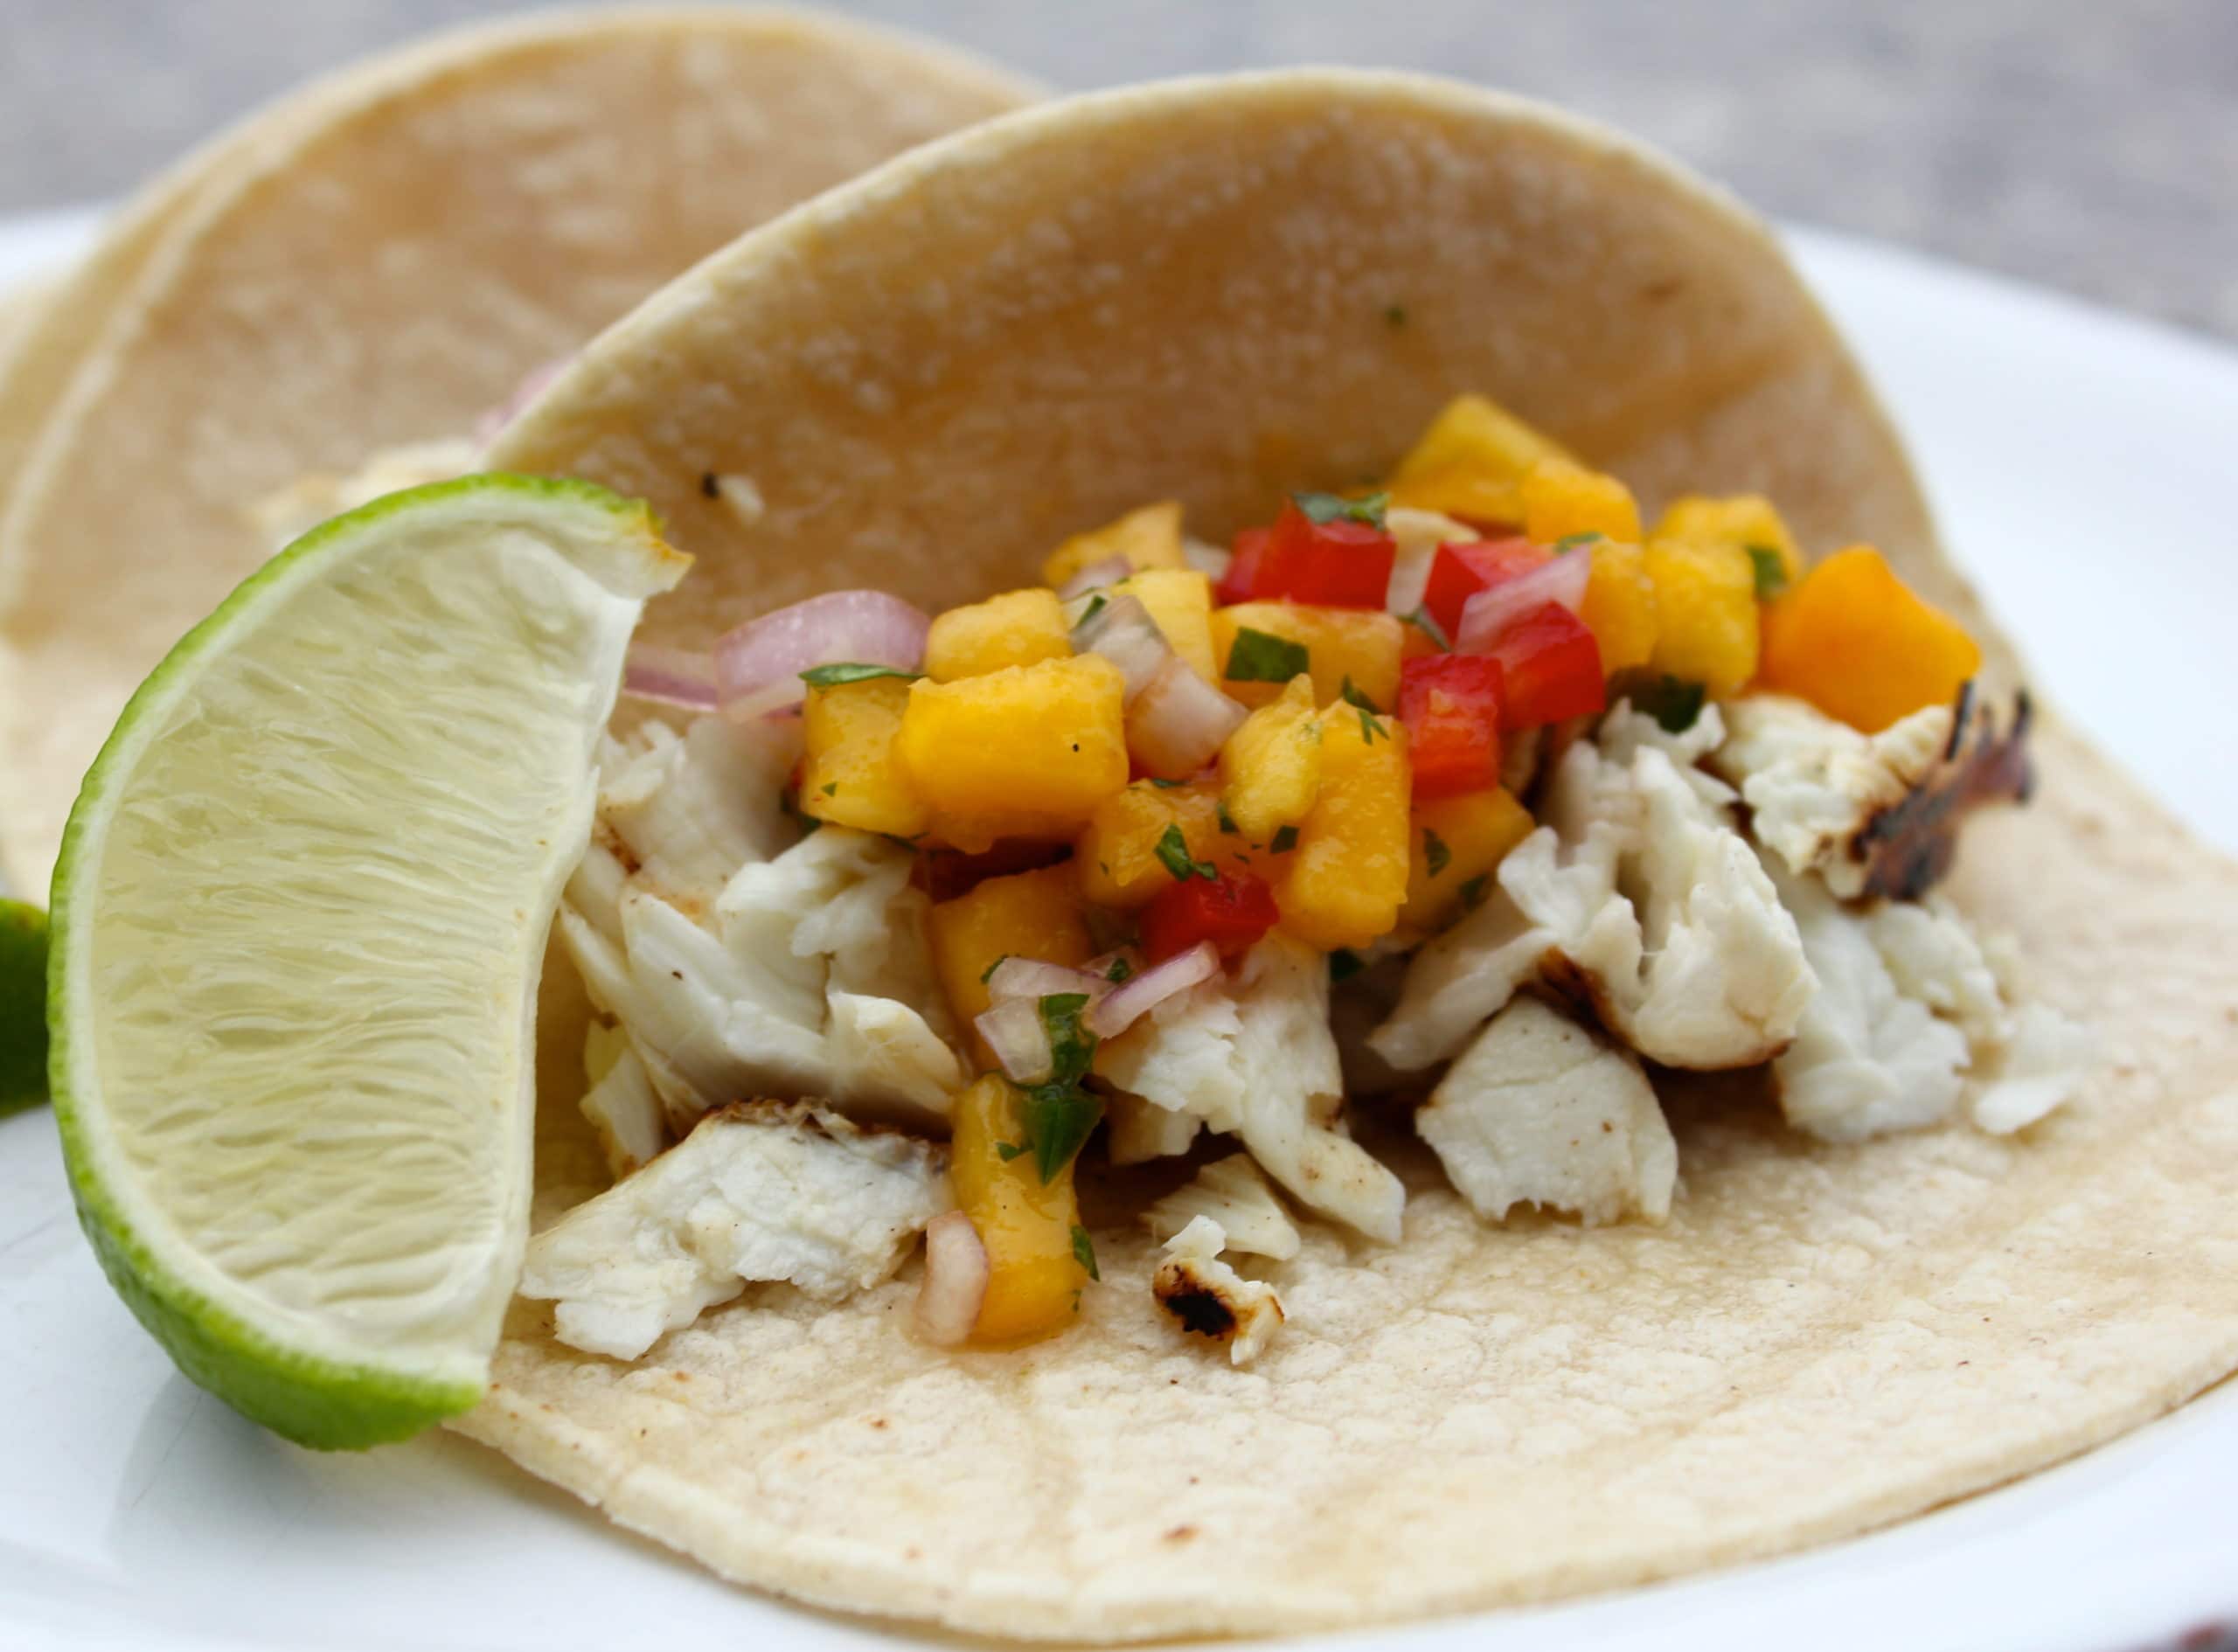 Grilled-halibut-tacos-with-peach-salsa-11